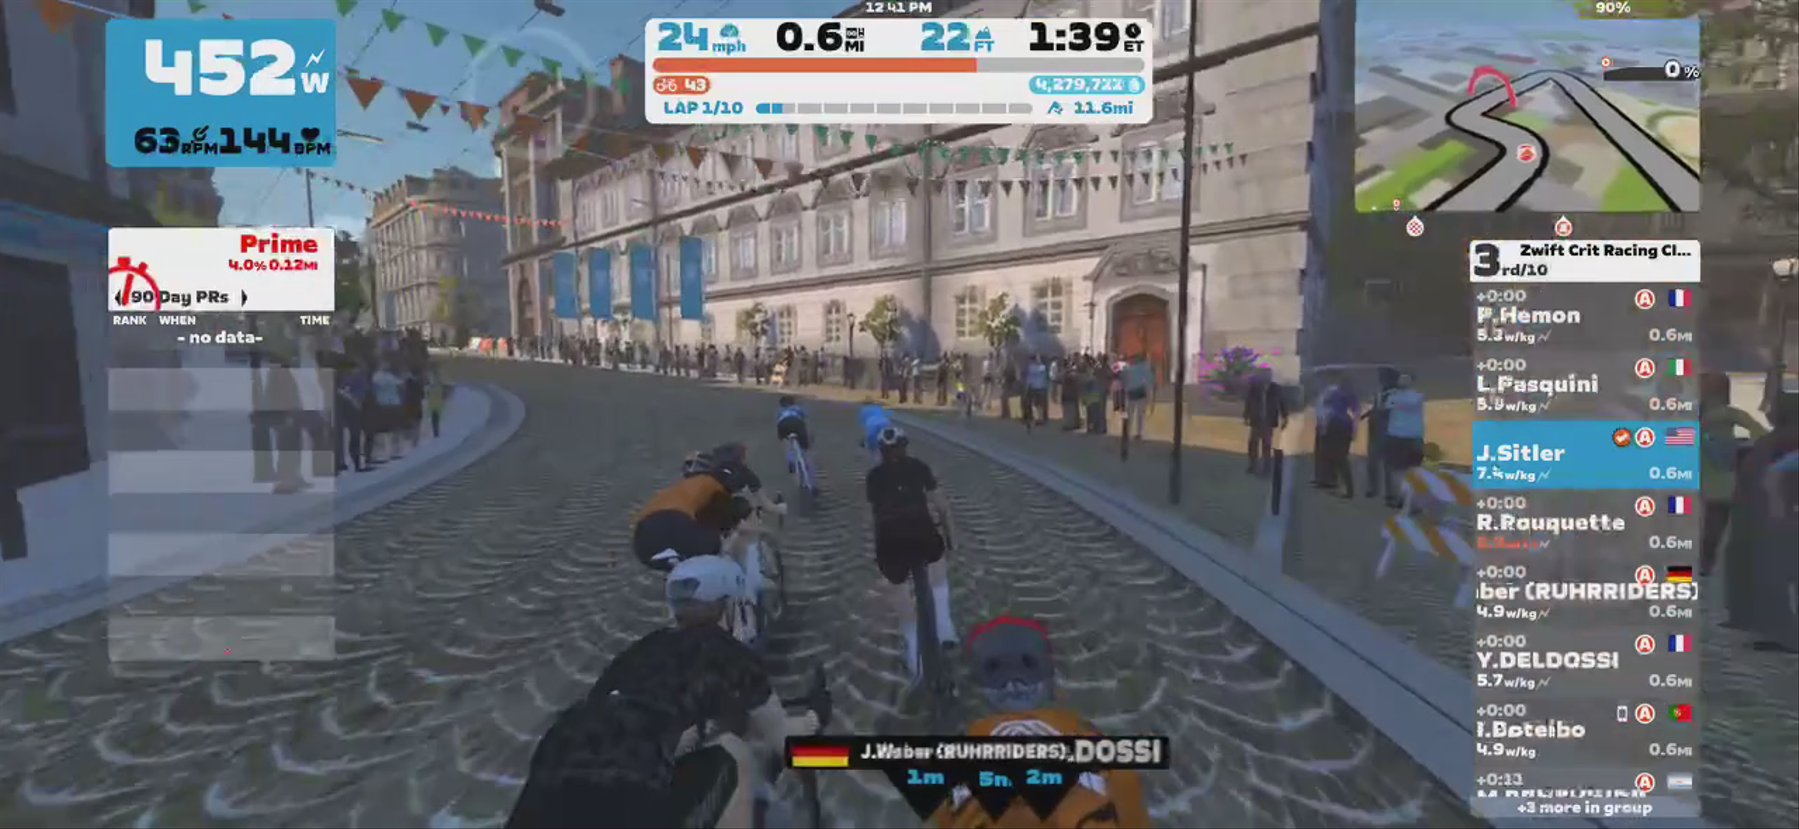 Zwift - Race: Zwift Crit Racing Club - Downtown Dolphin (A) on Downtown Dolphin in Crit City